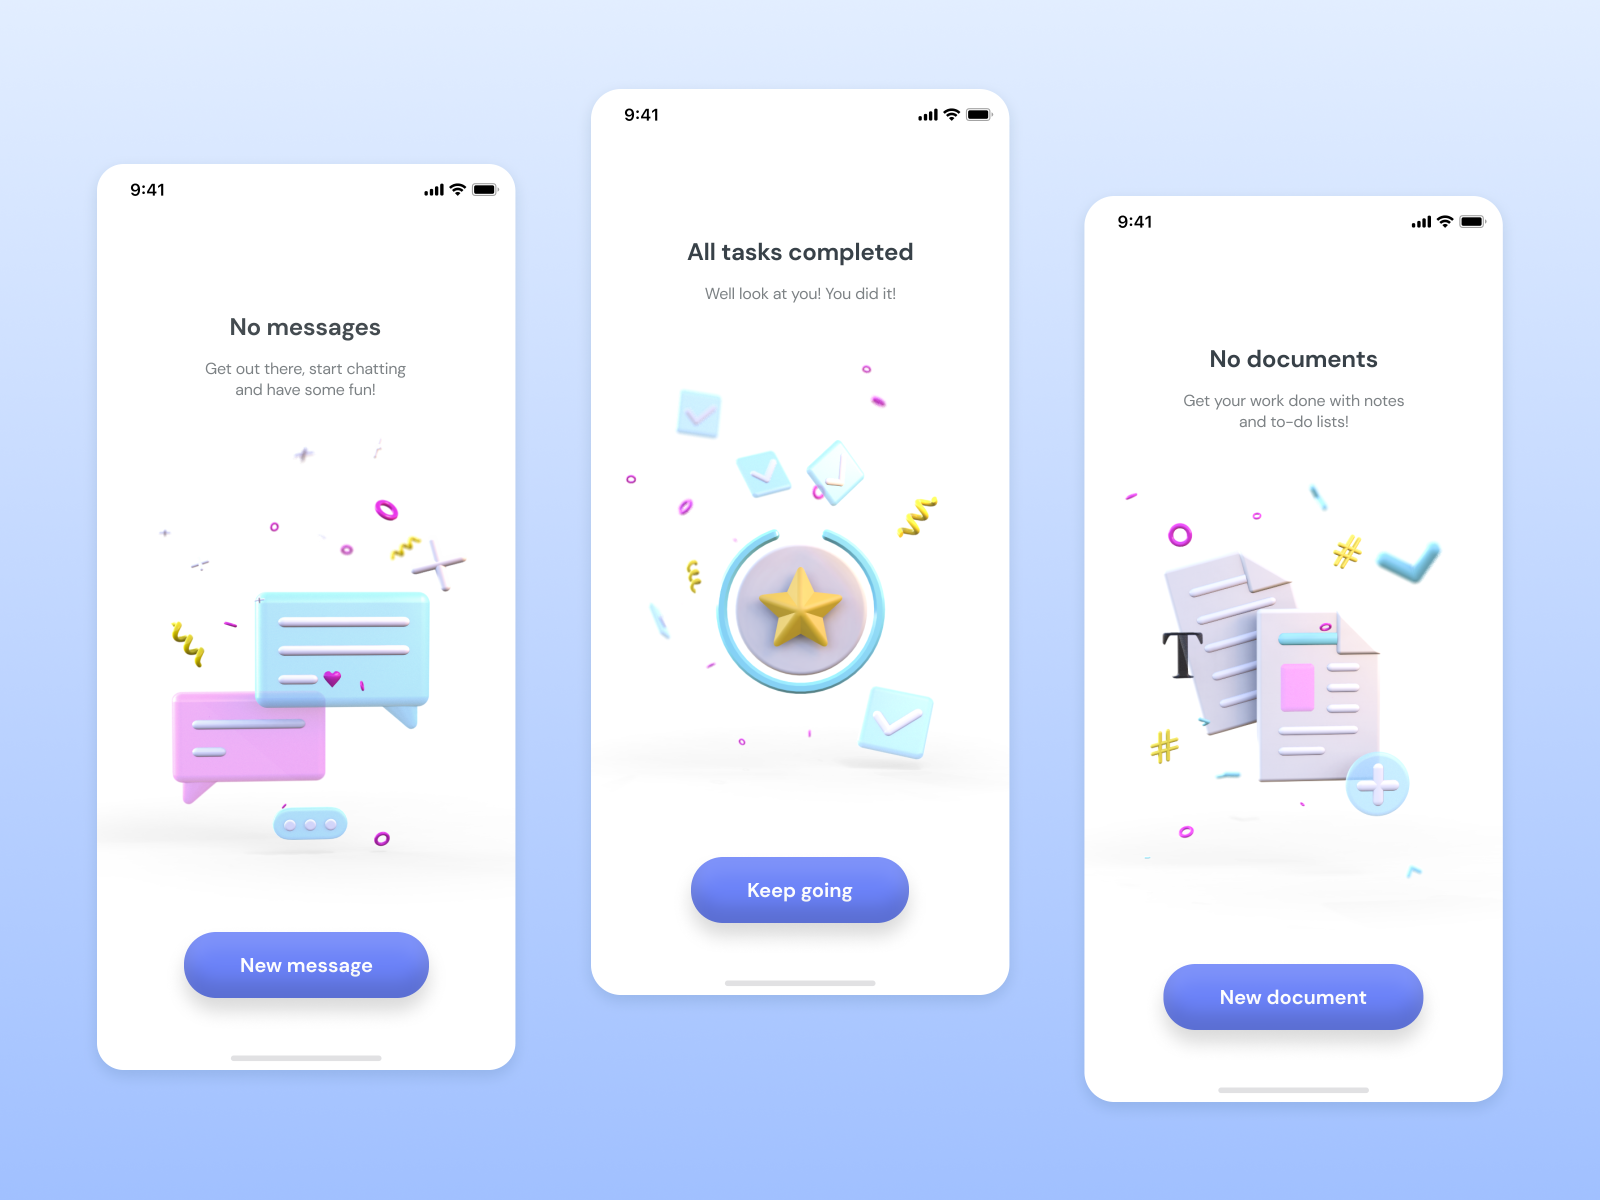 empty states of user interfaces (UI) from Dribbble